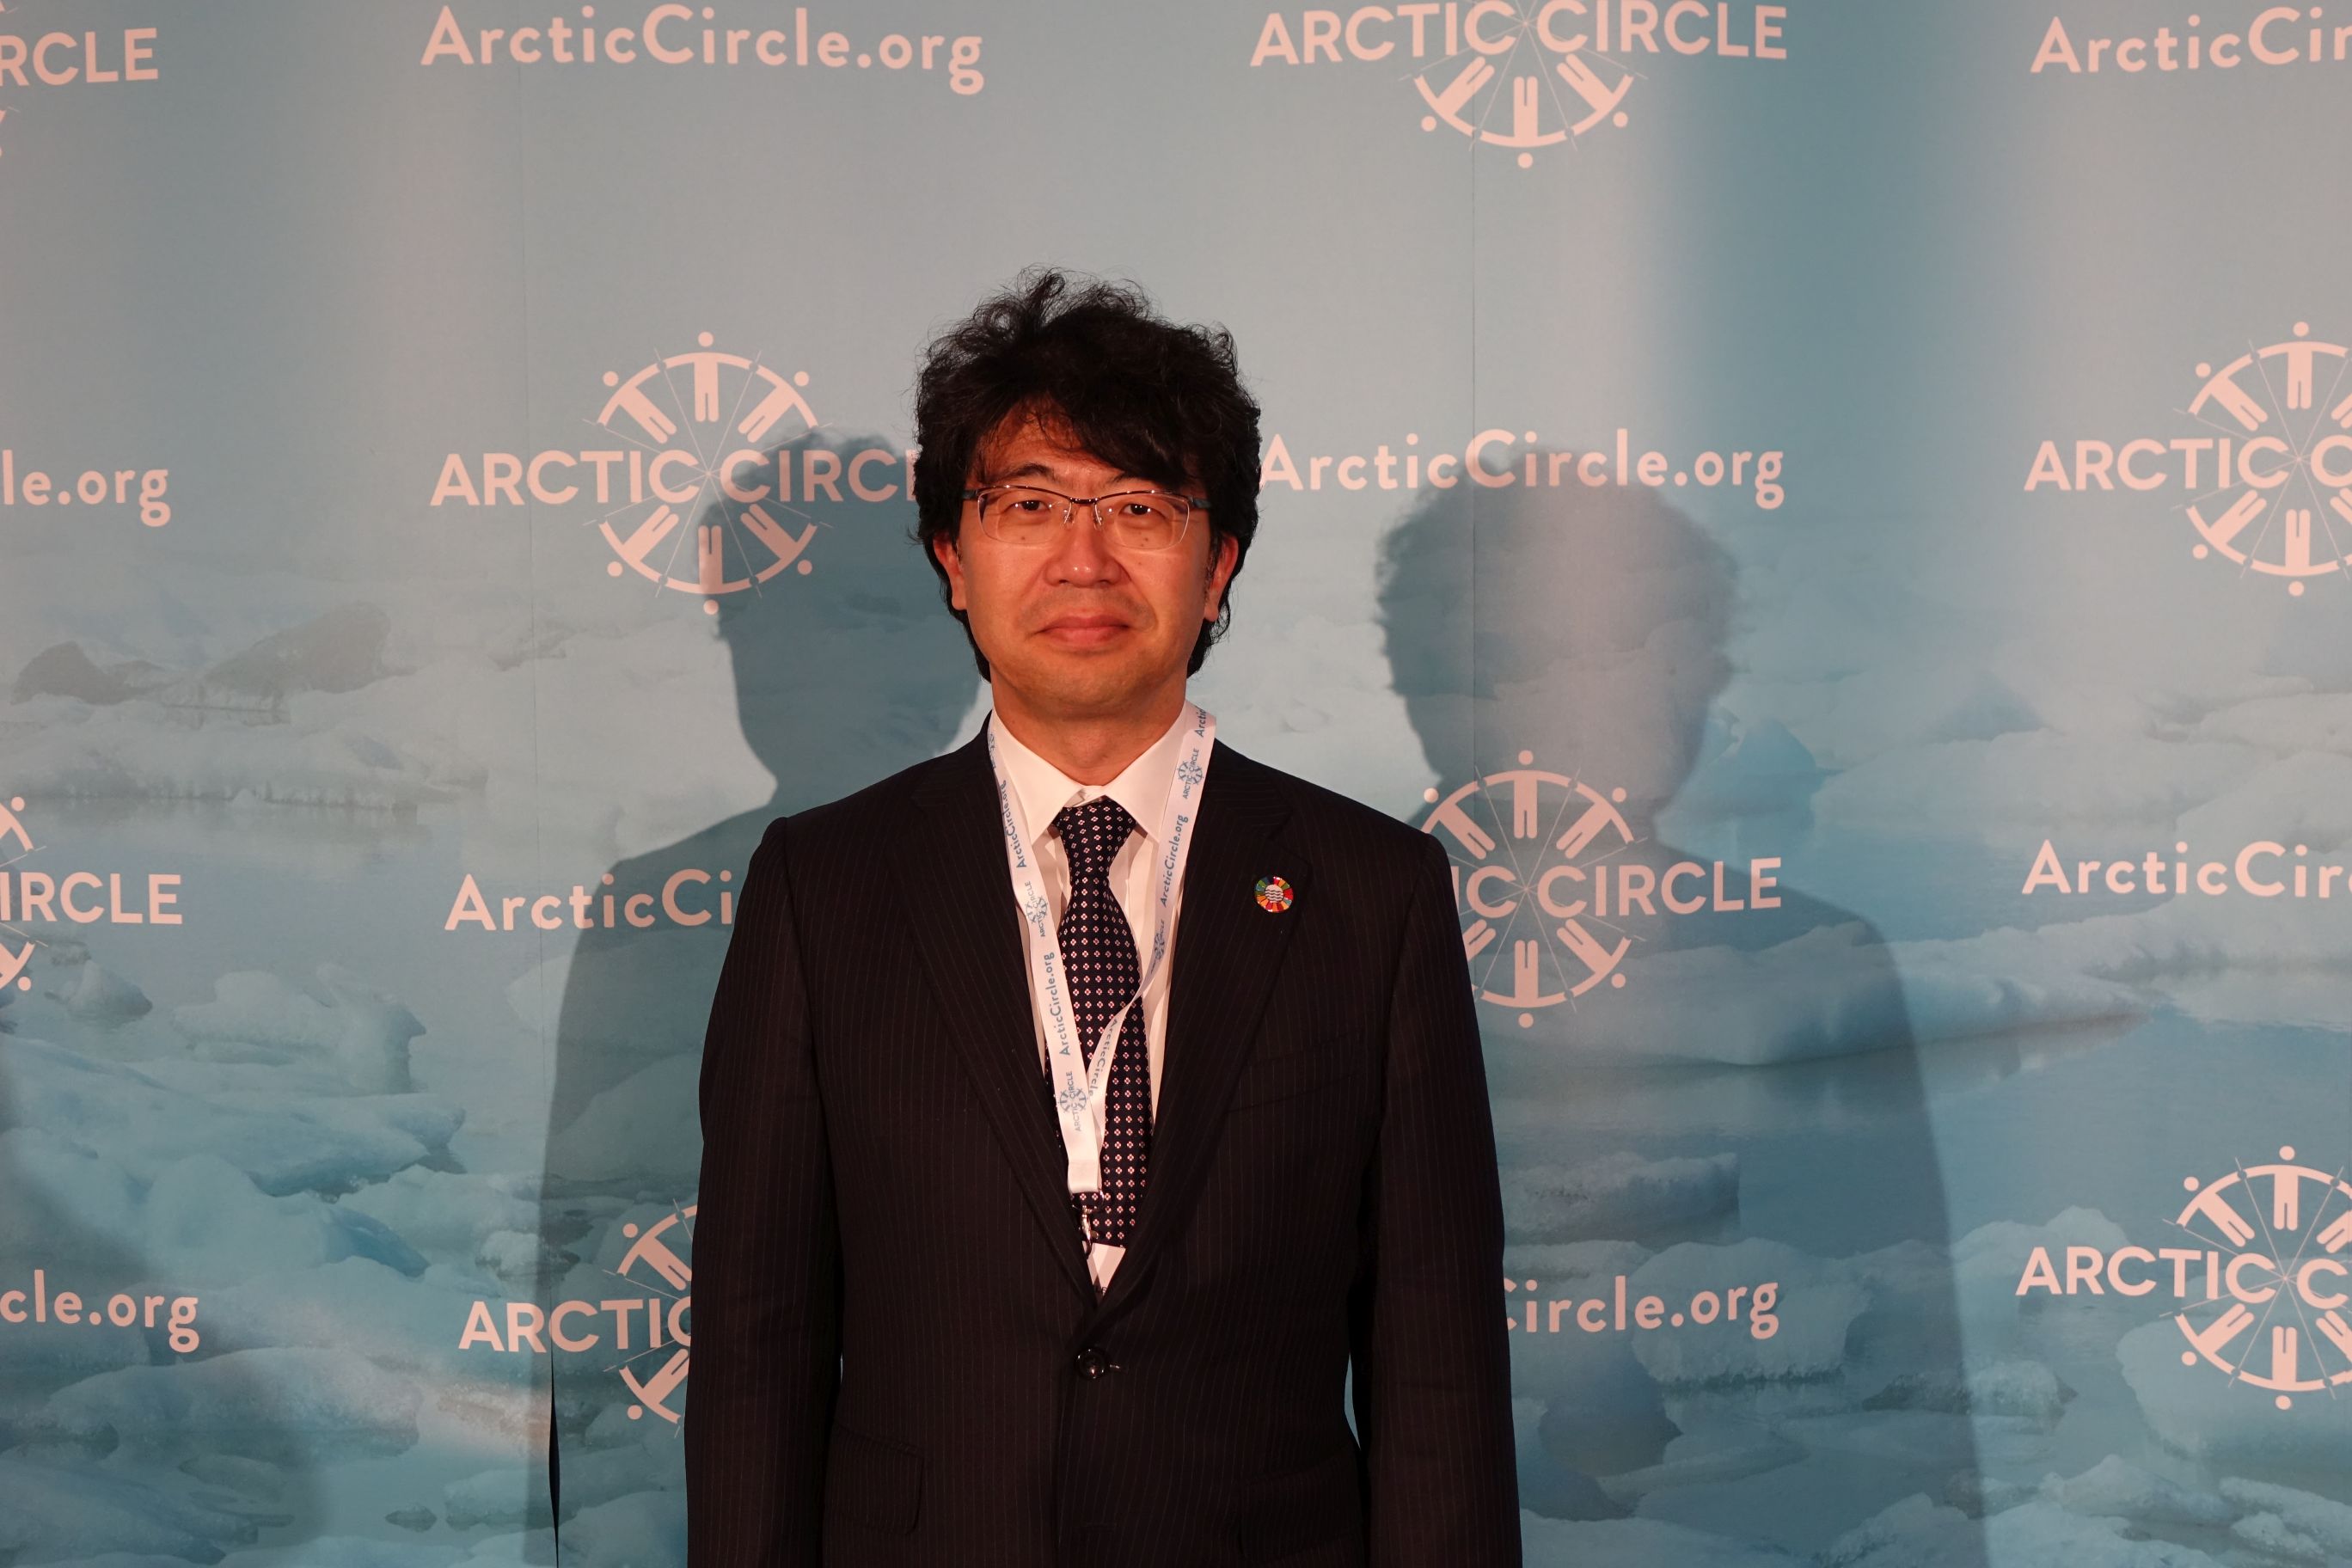 OPRI President Atsushi Sunami at the 2018 Arctic Circle Assembly, following his appointment to the Arctic Circle Advisory Board